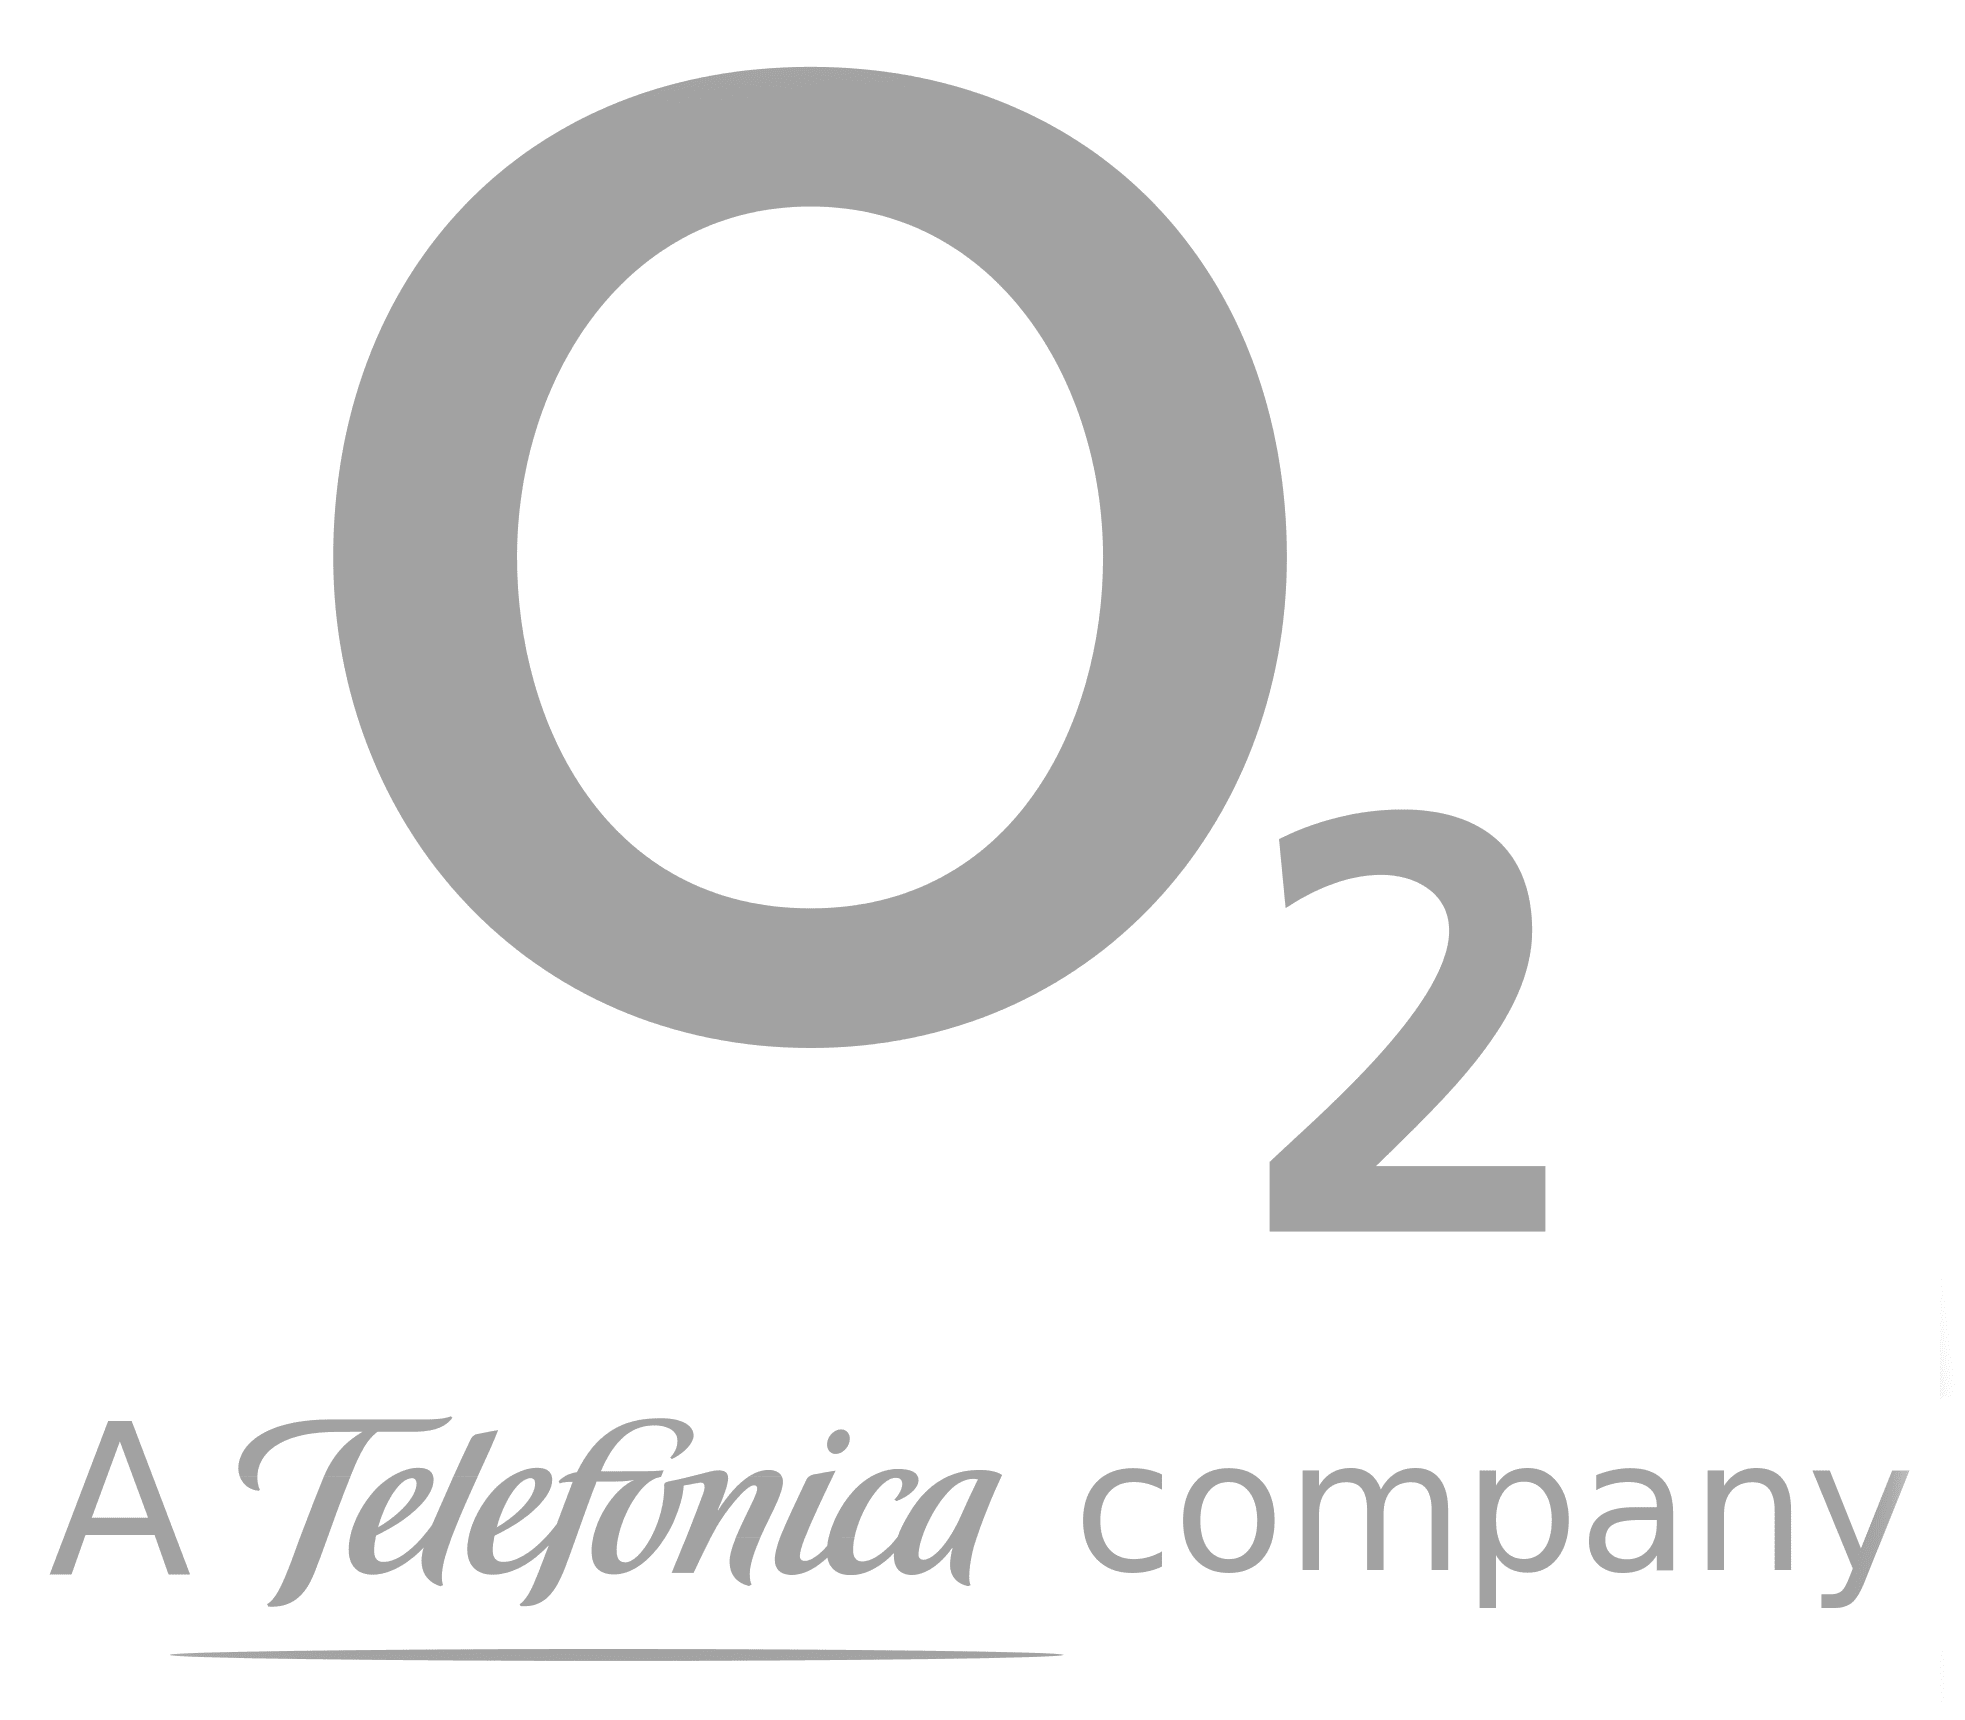 O2, a logo of telefonica company displayed on the agent desktop.